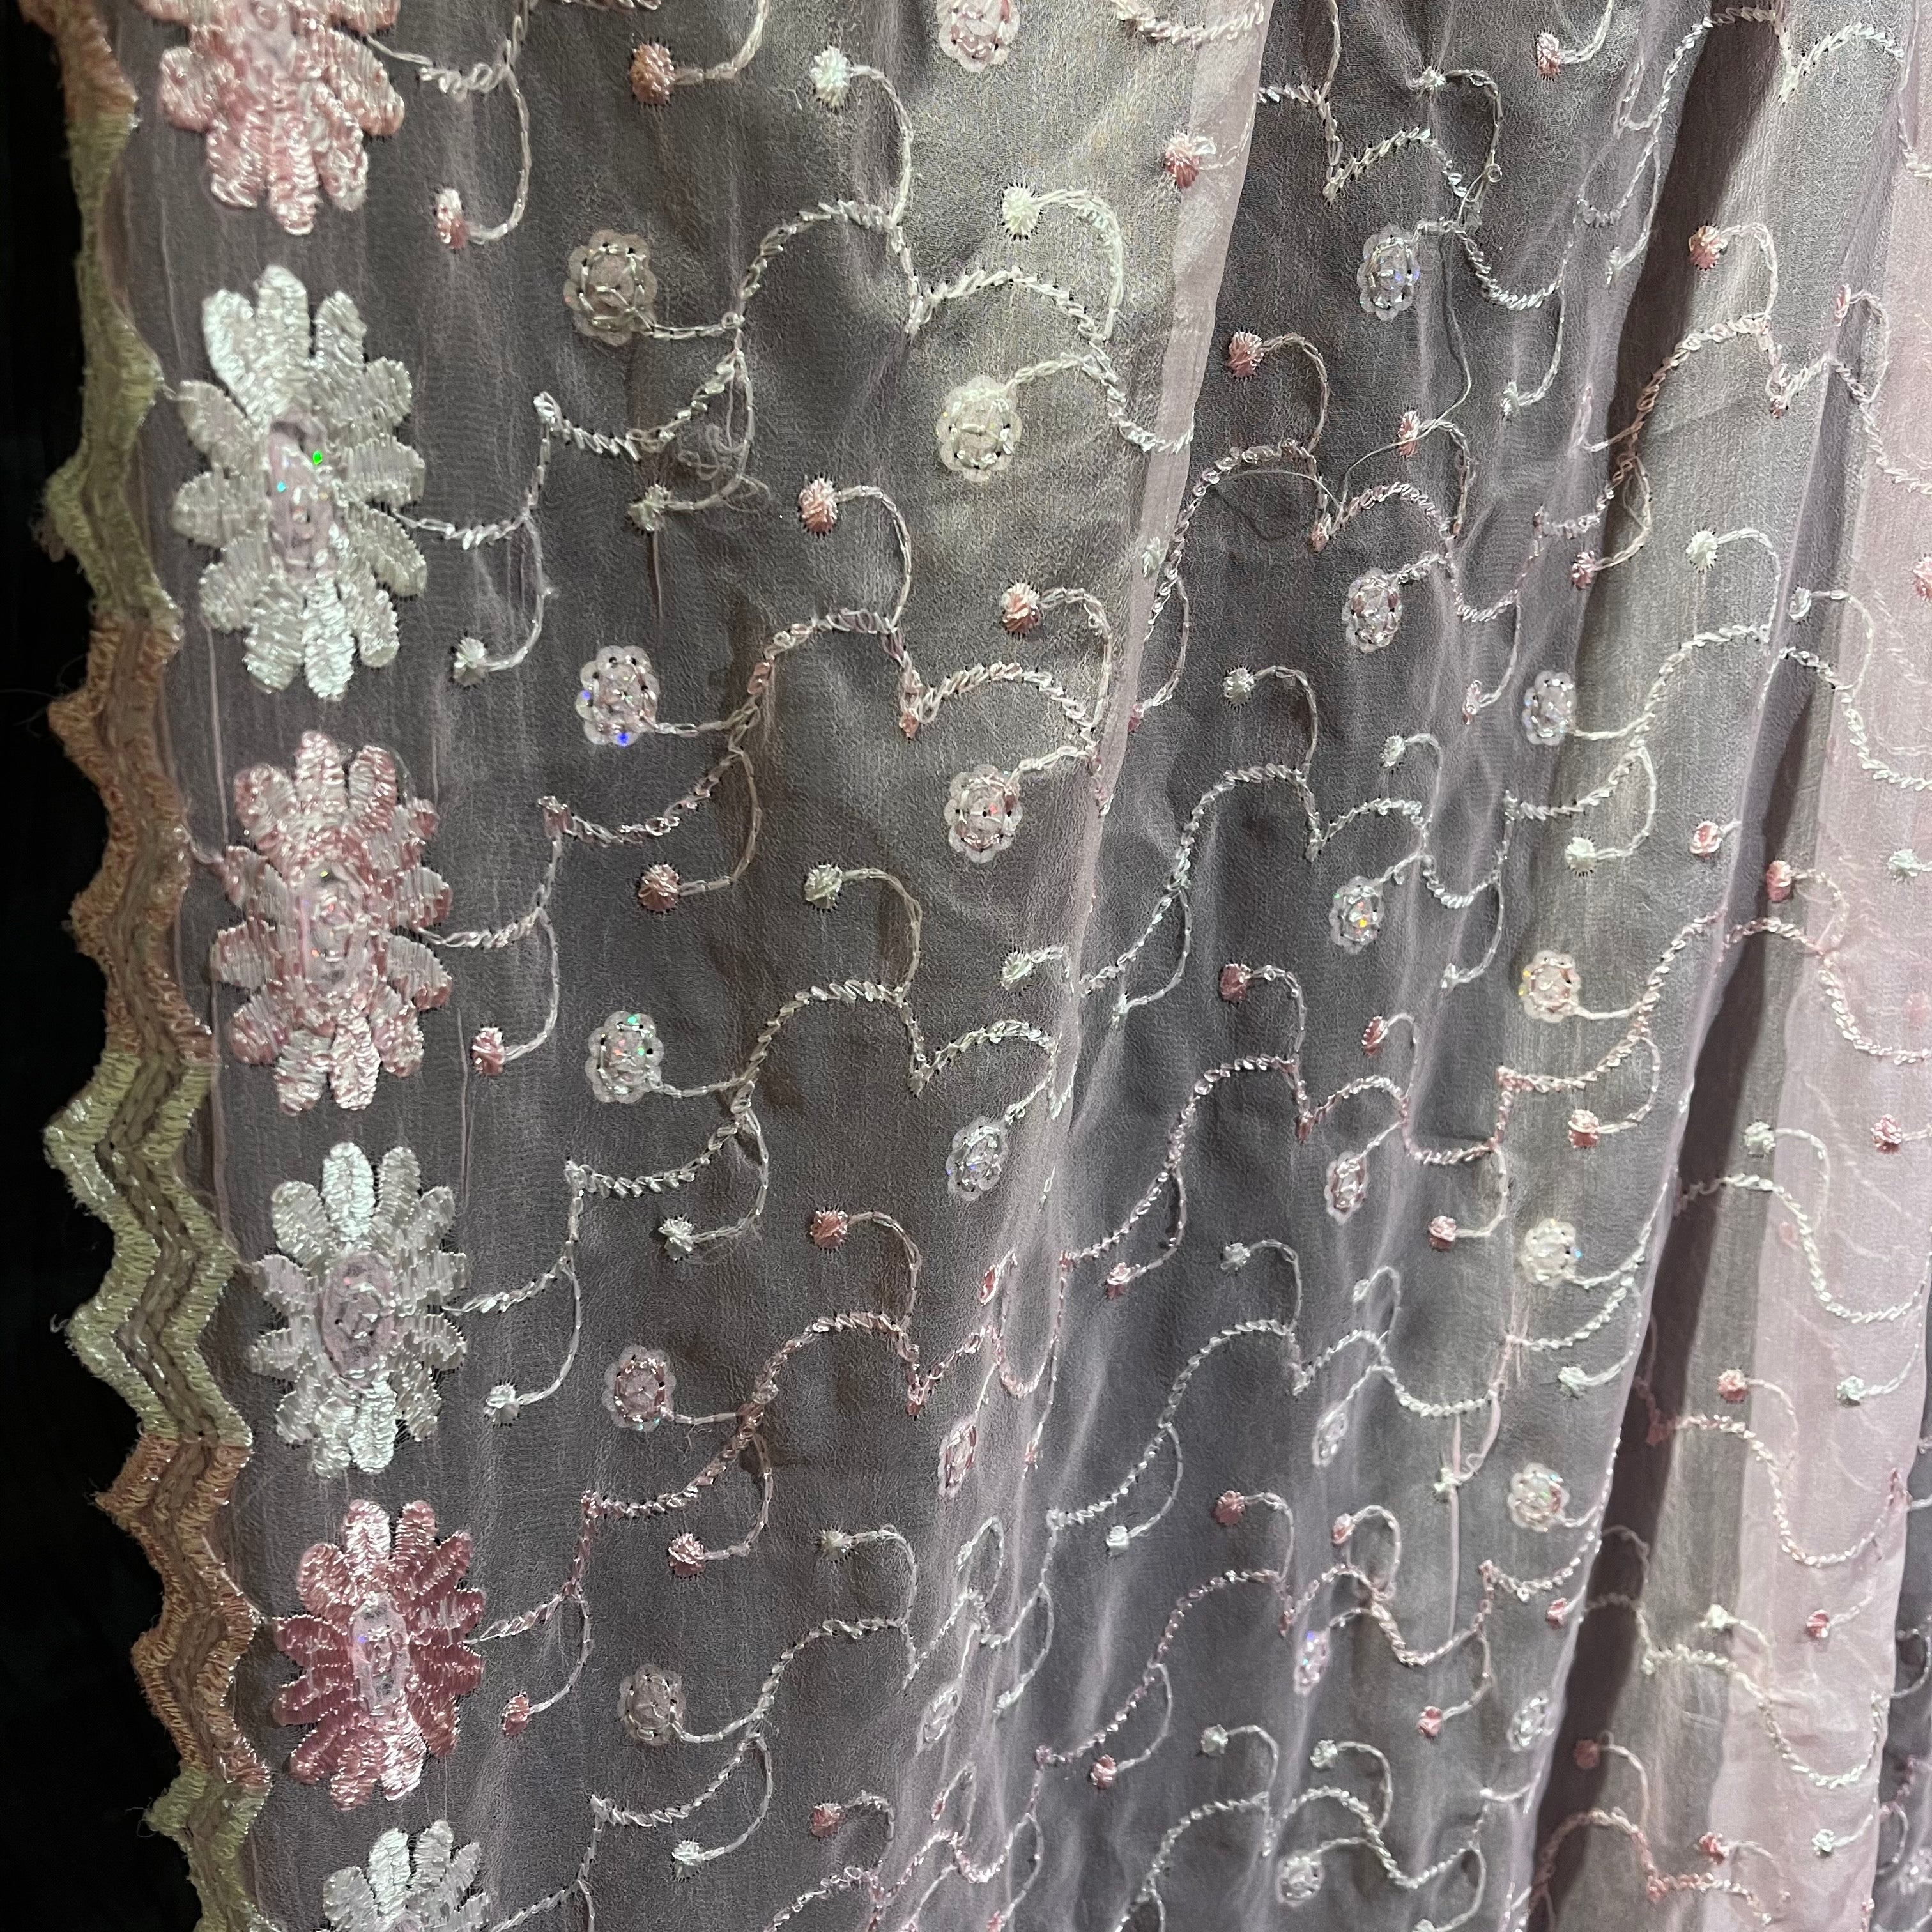 Single Unlined Pink Curtains -10 Styles - Vintage India NYC